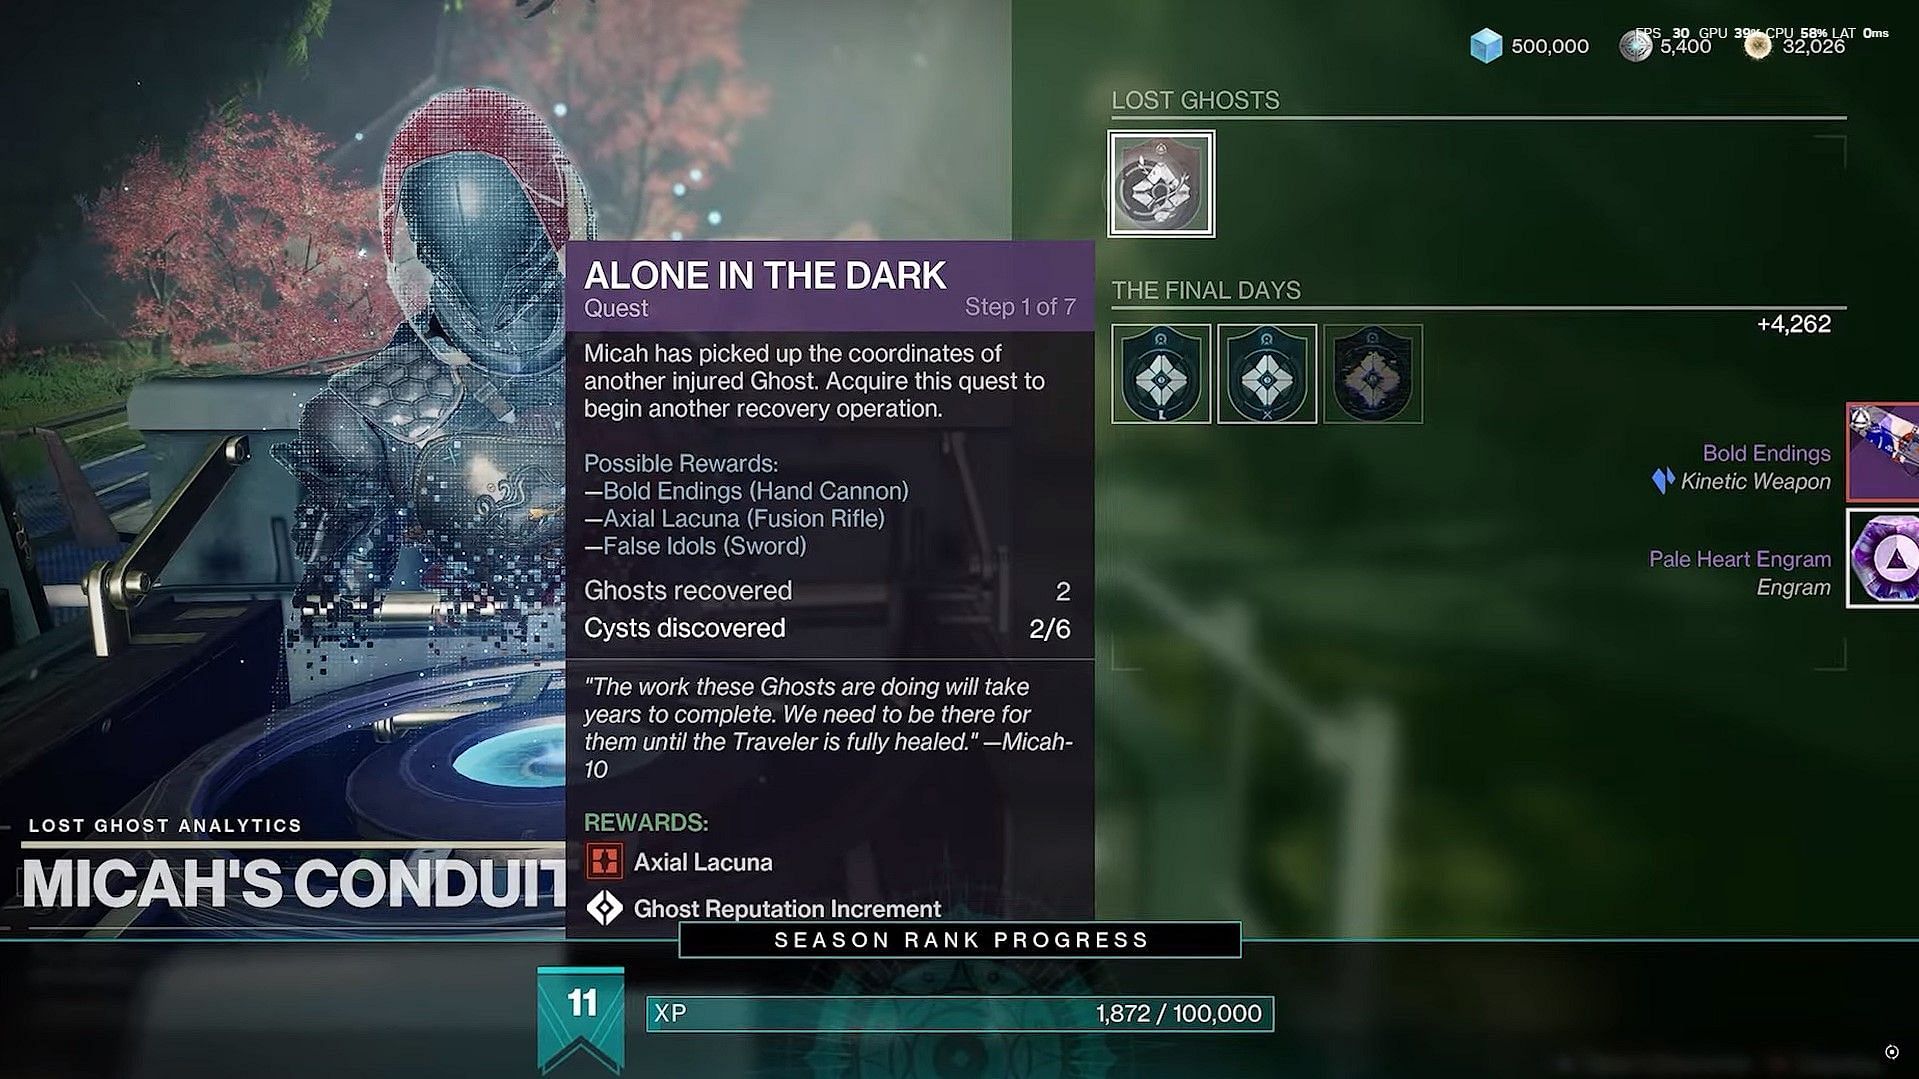 Alone in the Dark mission from Micah-10 (Image via Bungie)